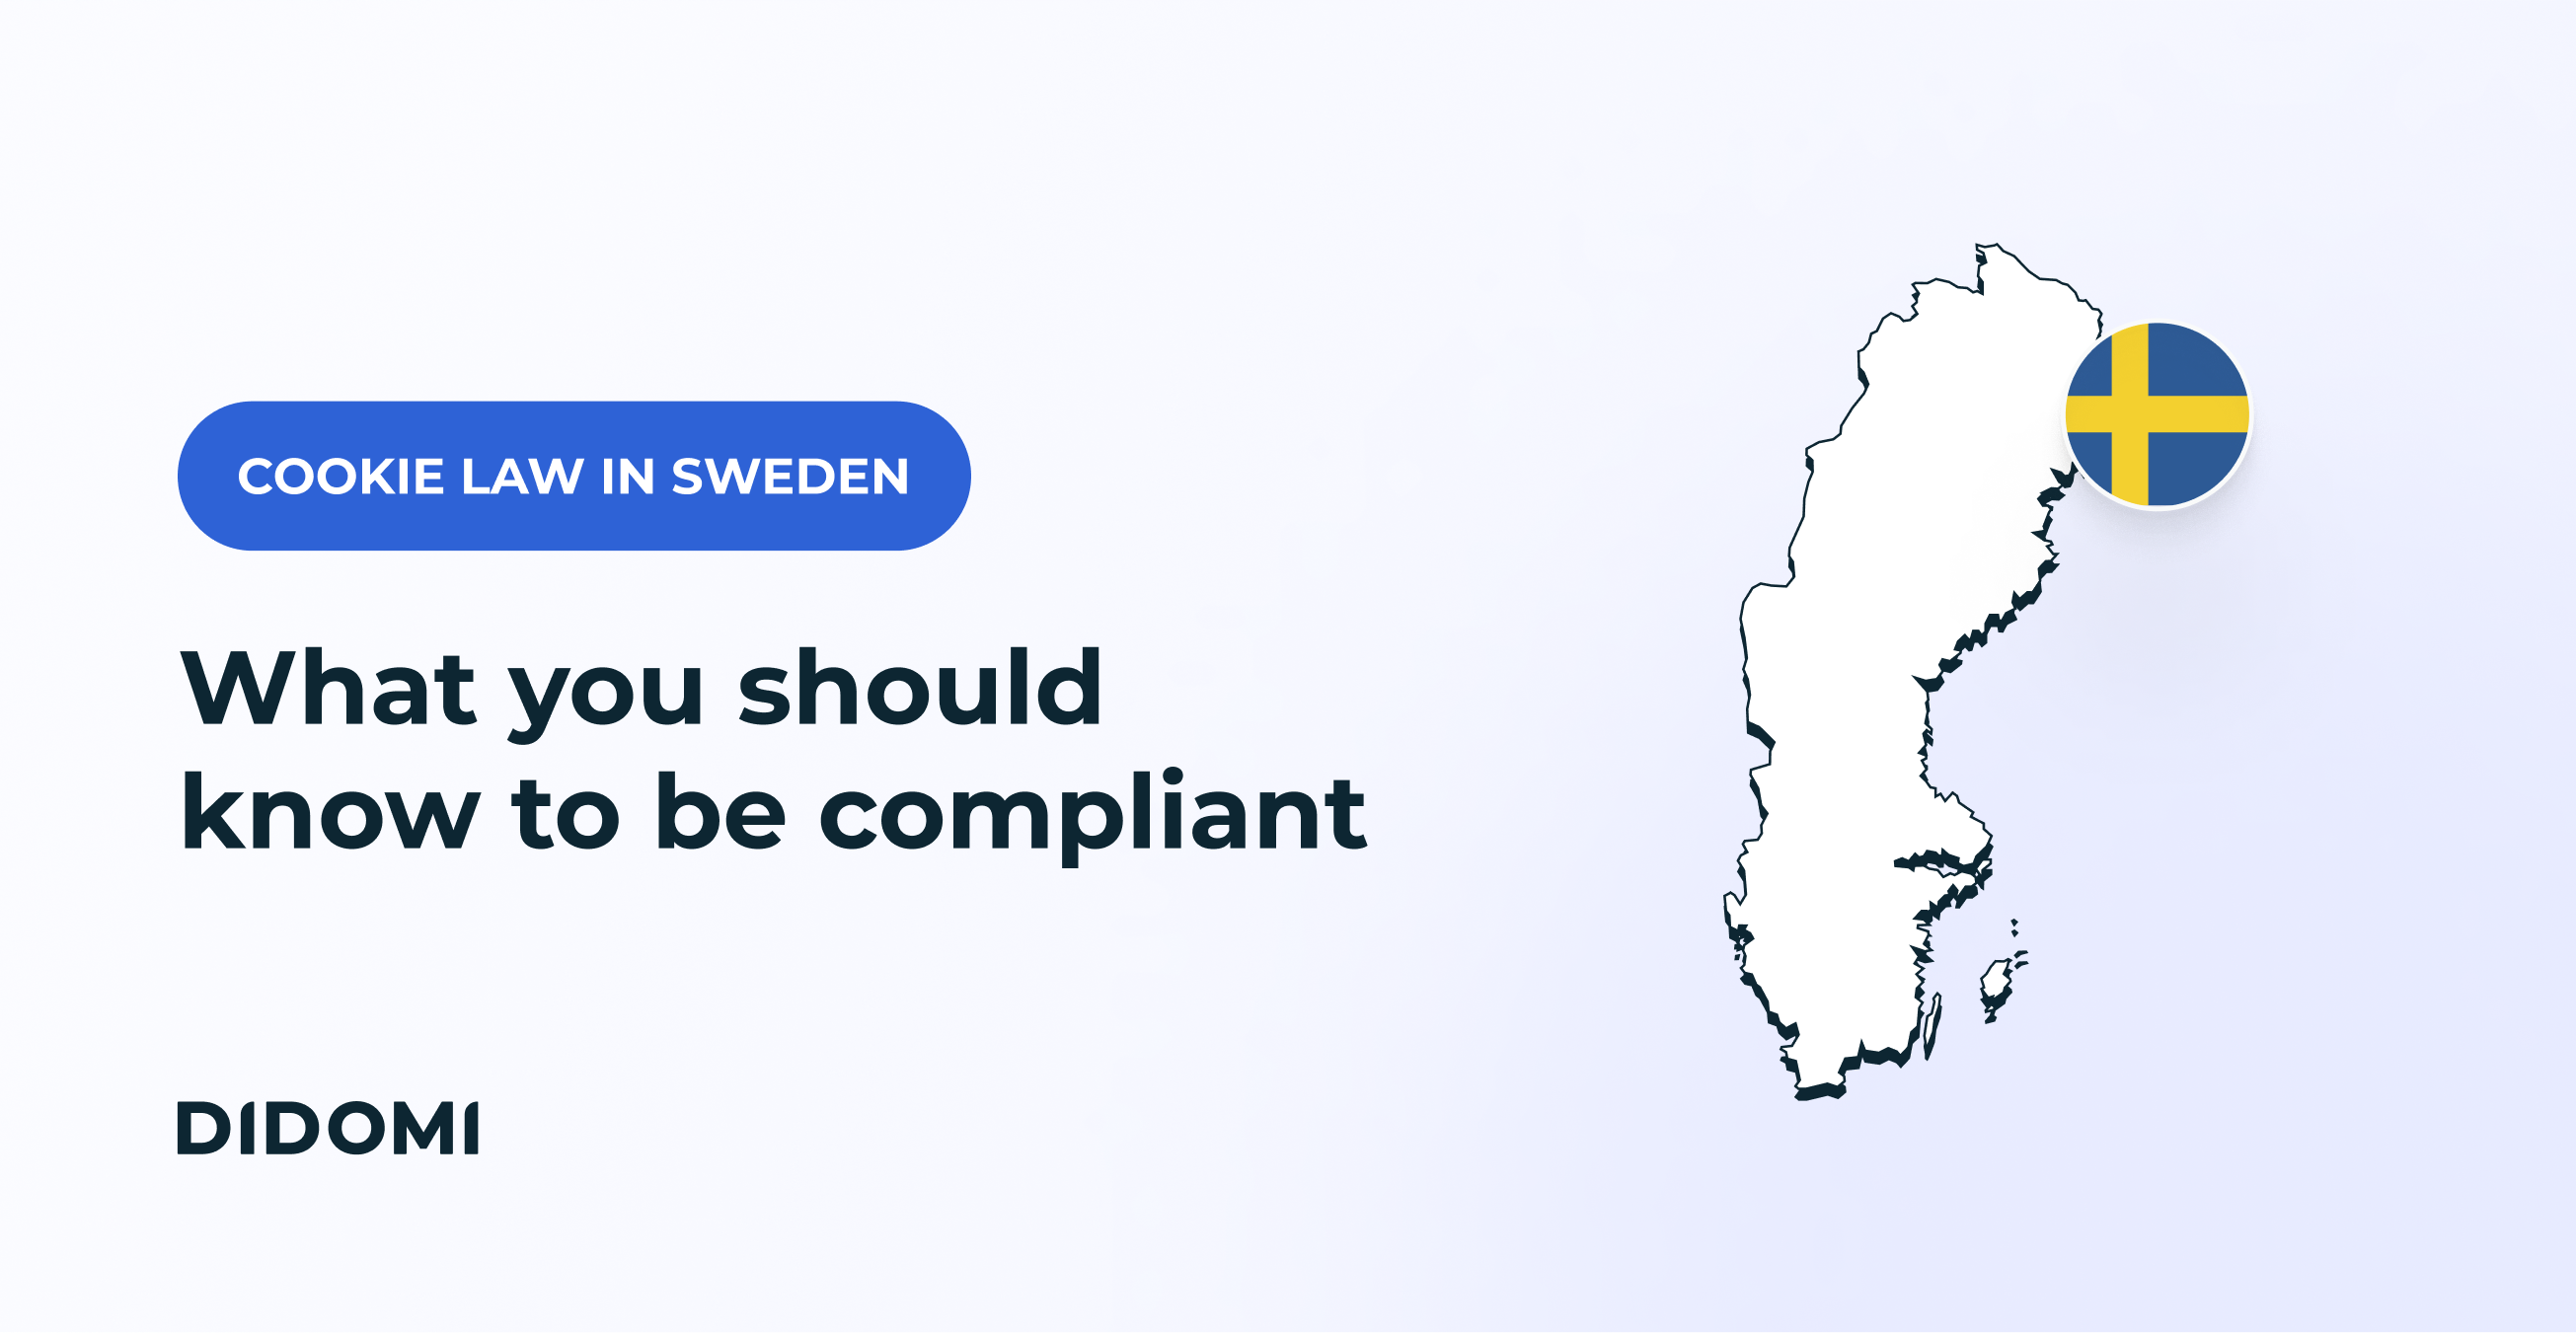 Cookie Law in Sweden: What You Should Know To Be Compliant